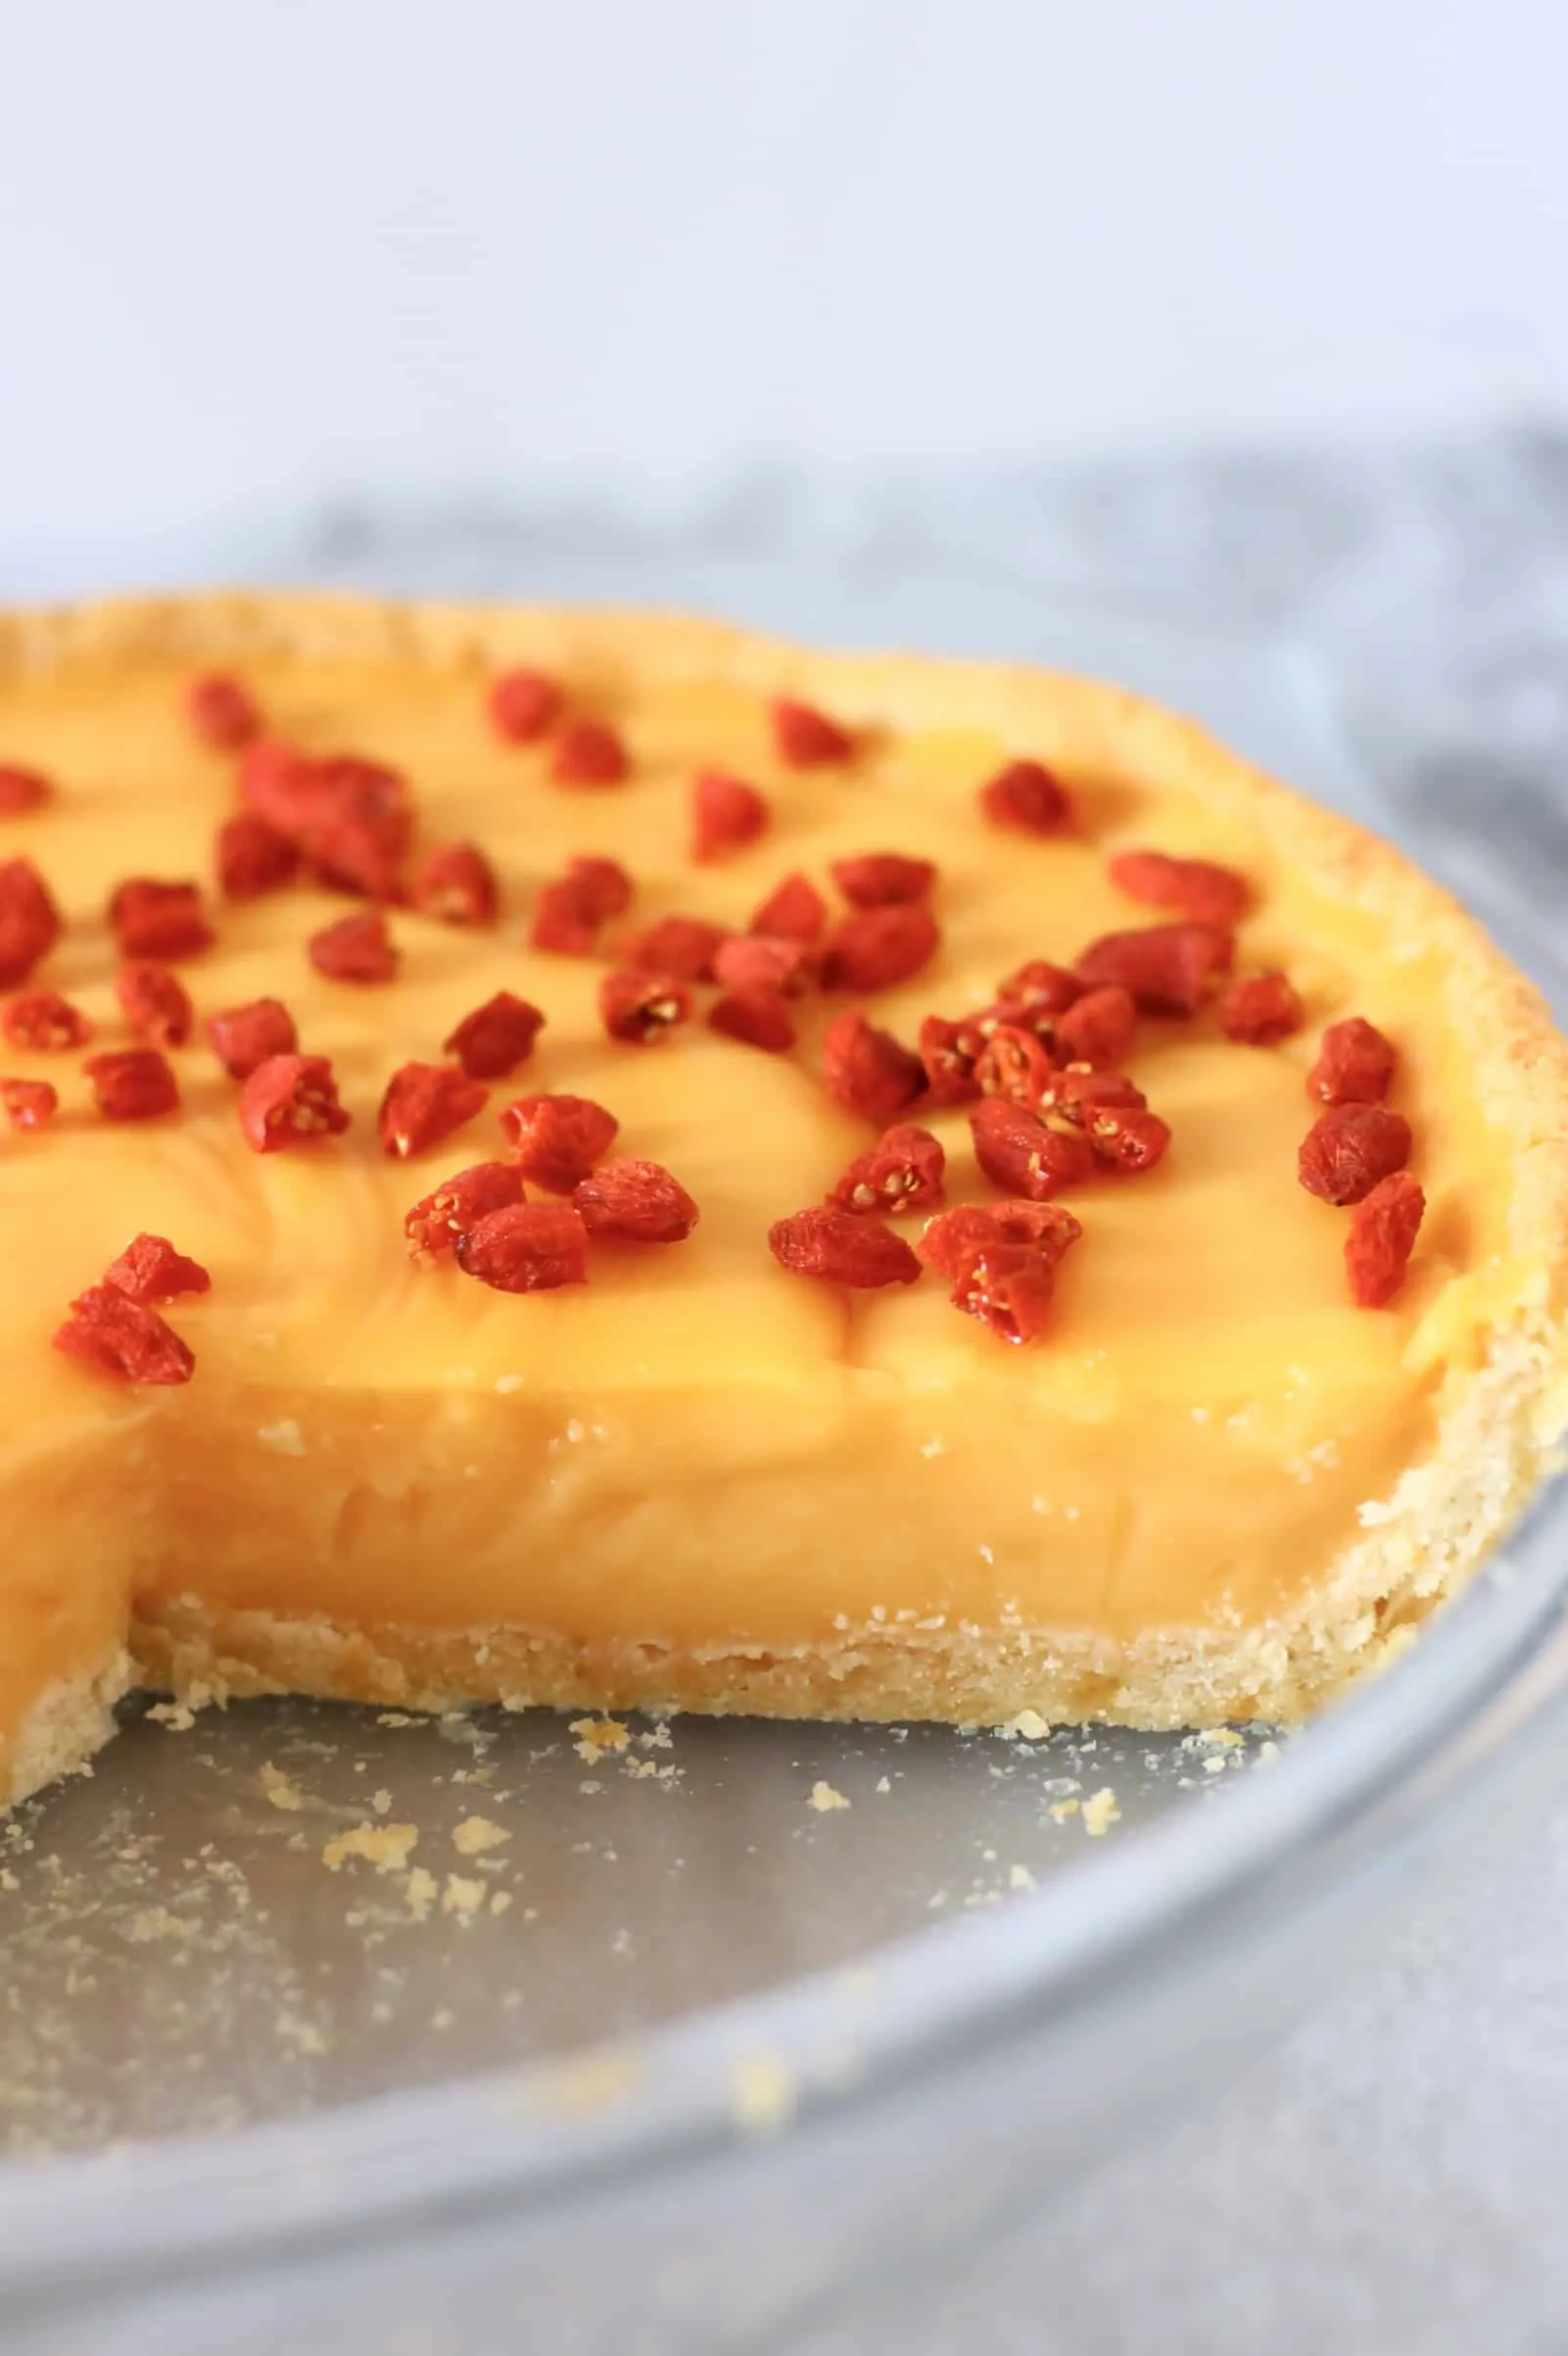 Lemon tart topped with goji berries in a pie dish